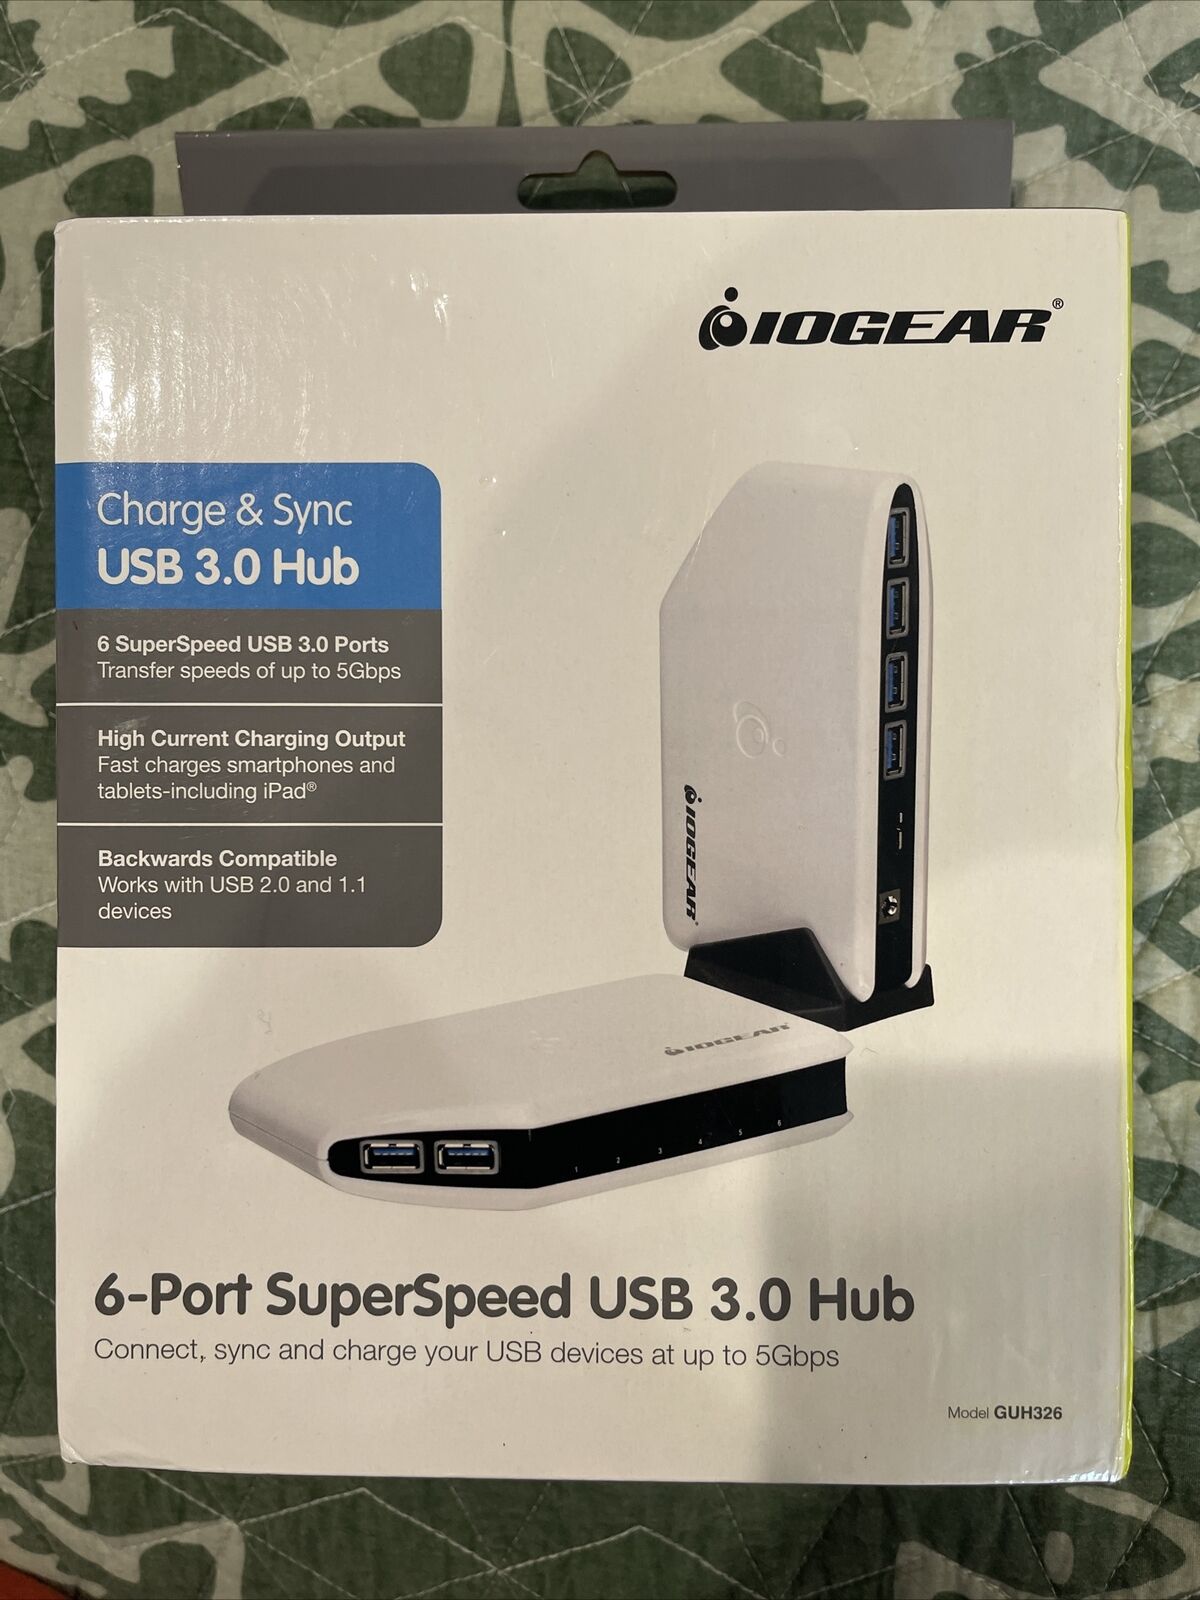 IOGEAR 6 Port Superspeed USB 3.0 Hub Charge Sync USB Devices 2.0 & 1.1 Computer